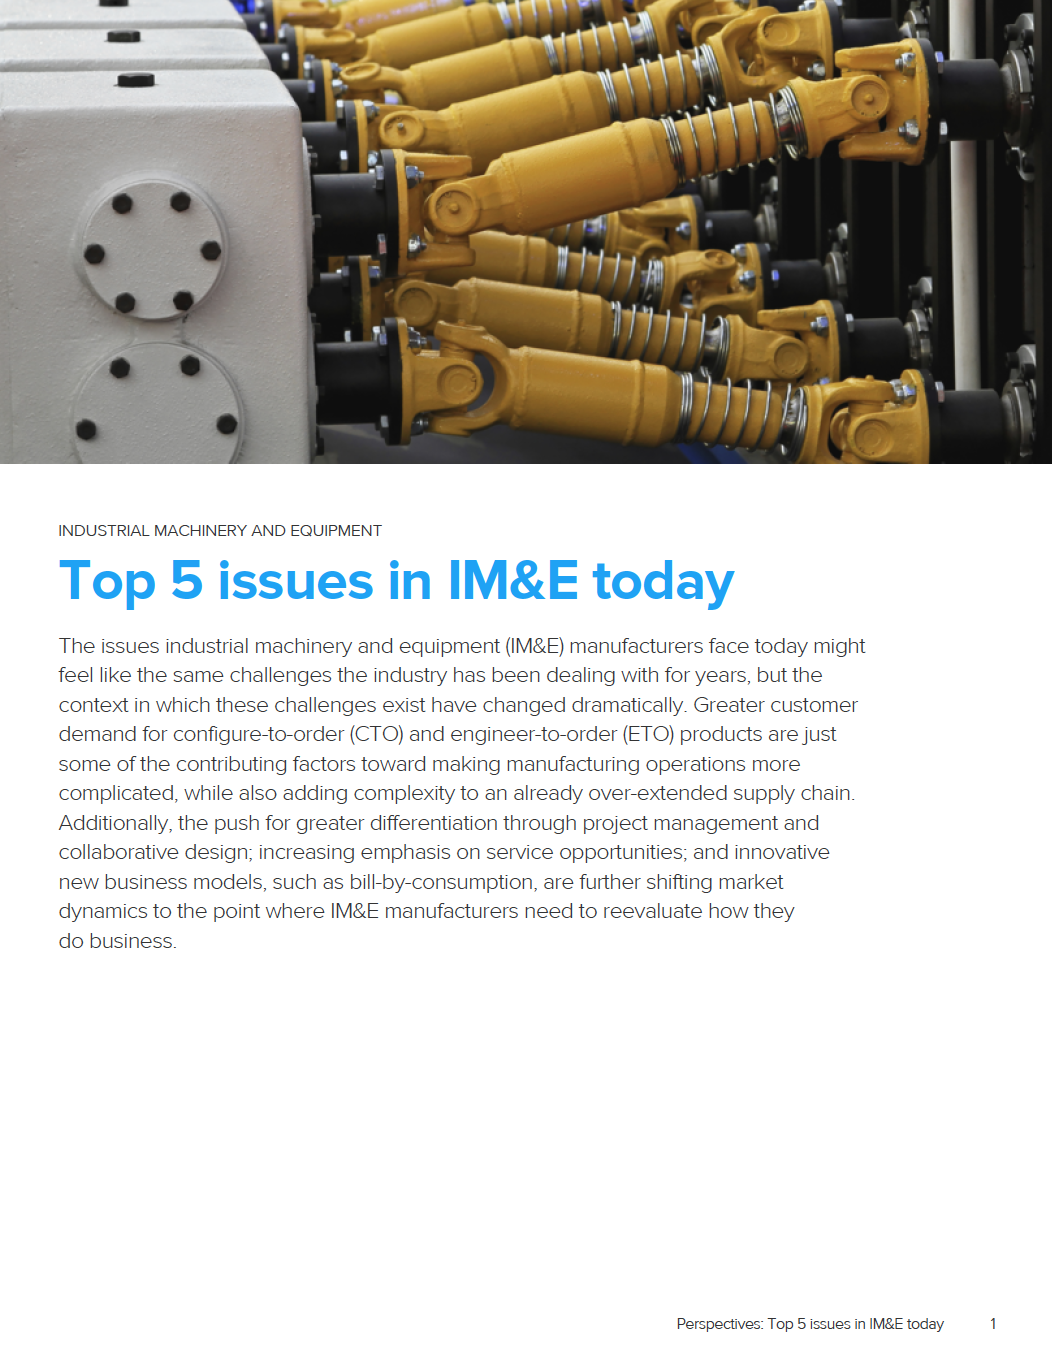 Top 5 Issues in Industrial Machinery and Equipment Today